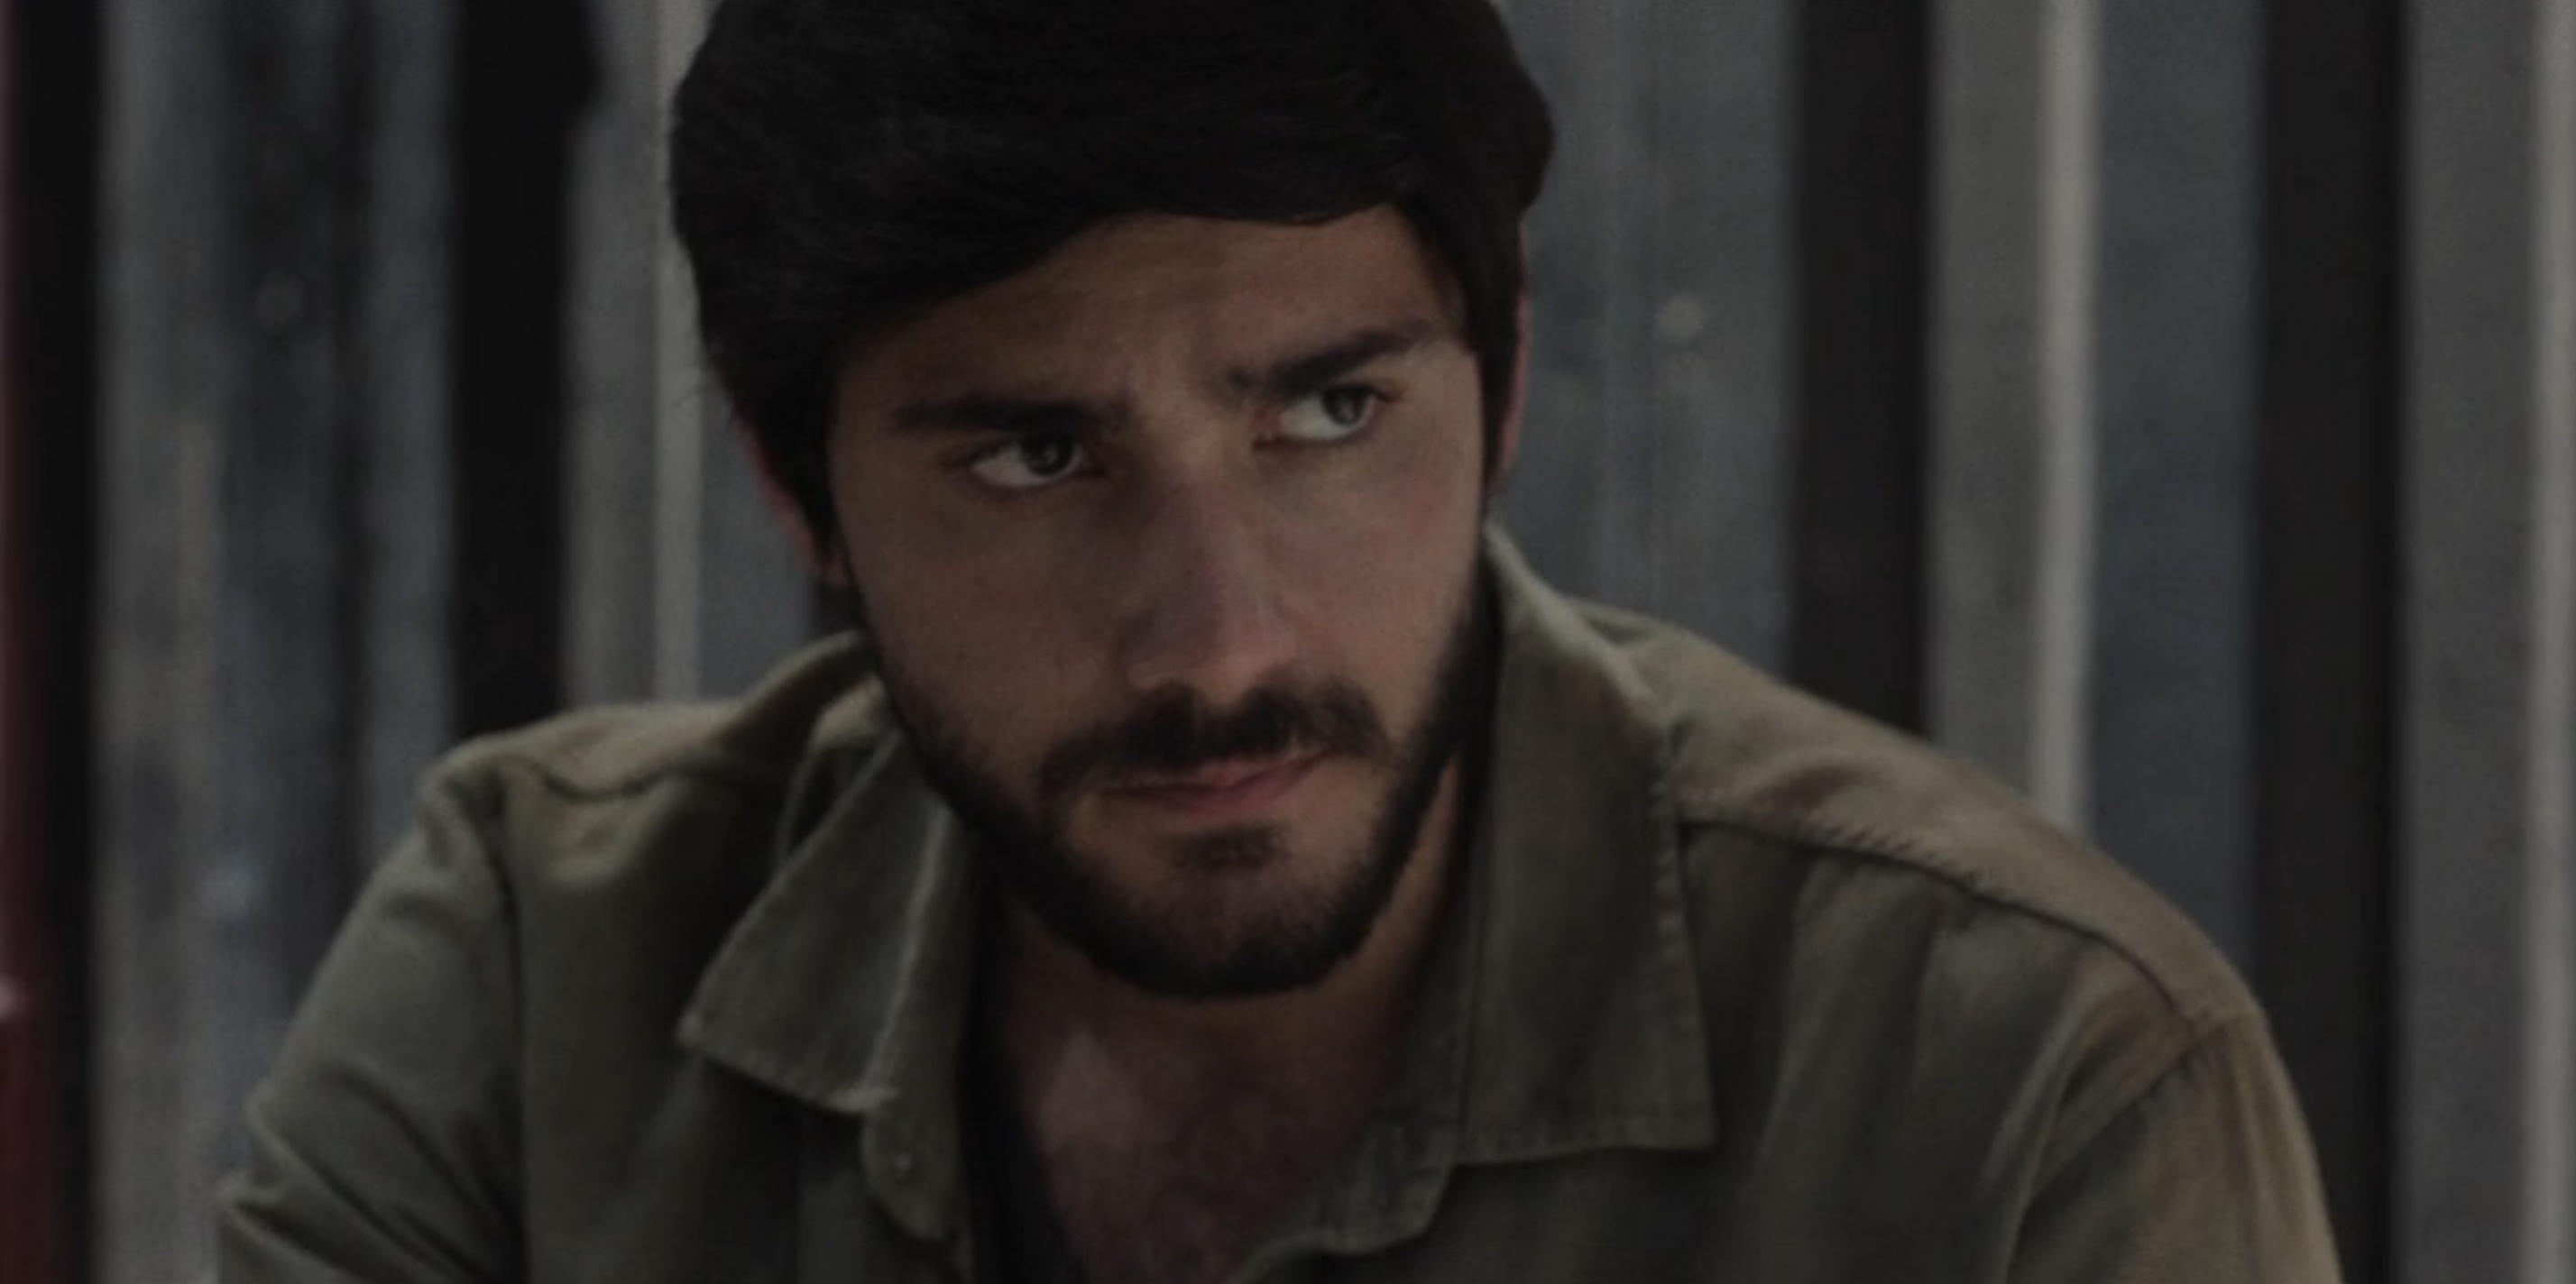 Ghosts of Beirut Cast on Showtime - Amir Khoury as Imad Mughniyeh (1982)